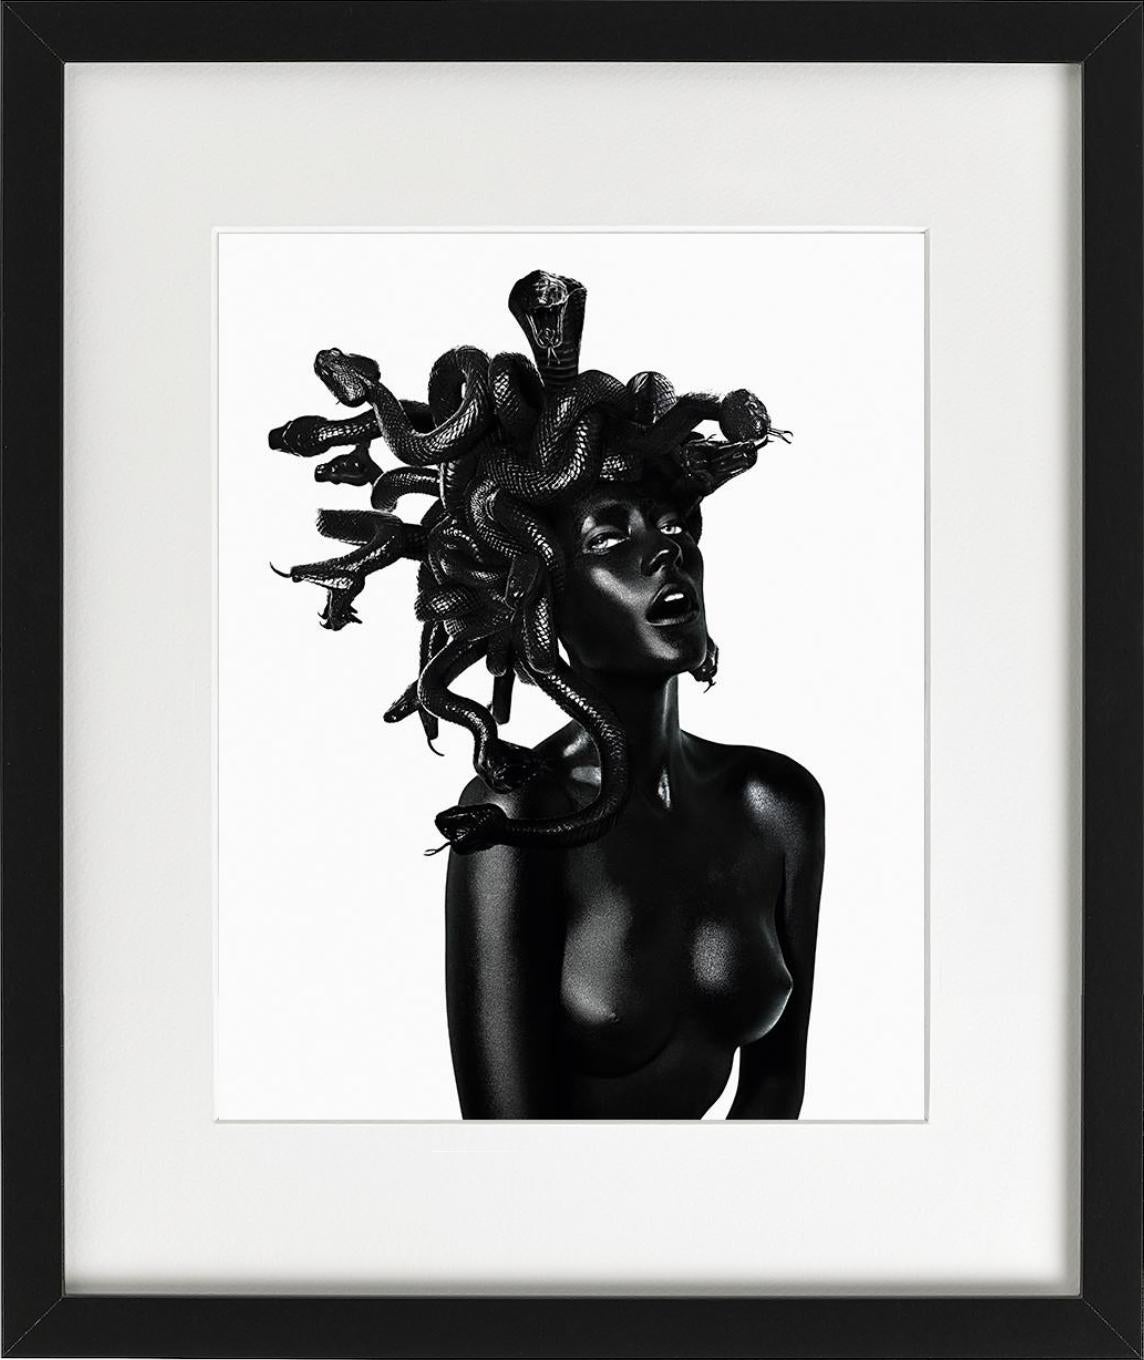  Dani Smith as Medusa - Portrait with snake hair, fine art photography, 2011 - Black Color Photograph by Rankin and Damien Hirst